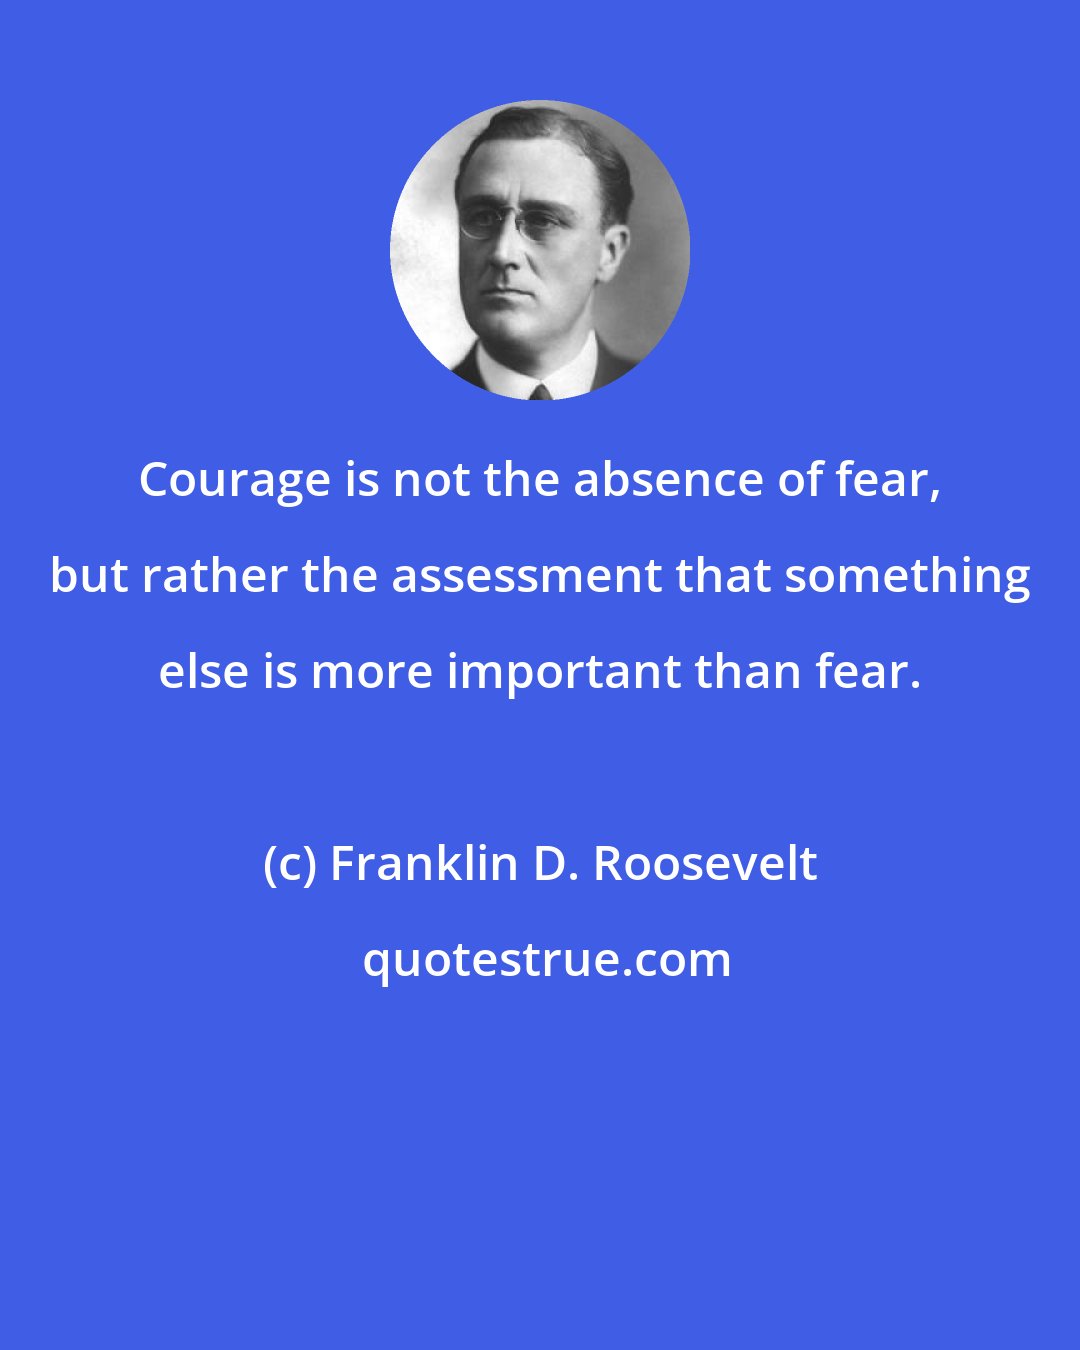 Franklin D. Roosevelt: Courage is not the absence of fear, but rather the assessment that something else is more important than fear.